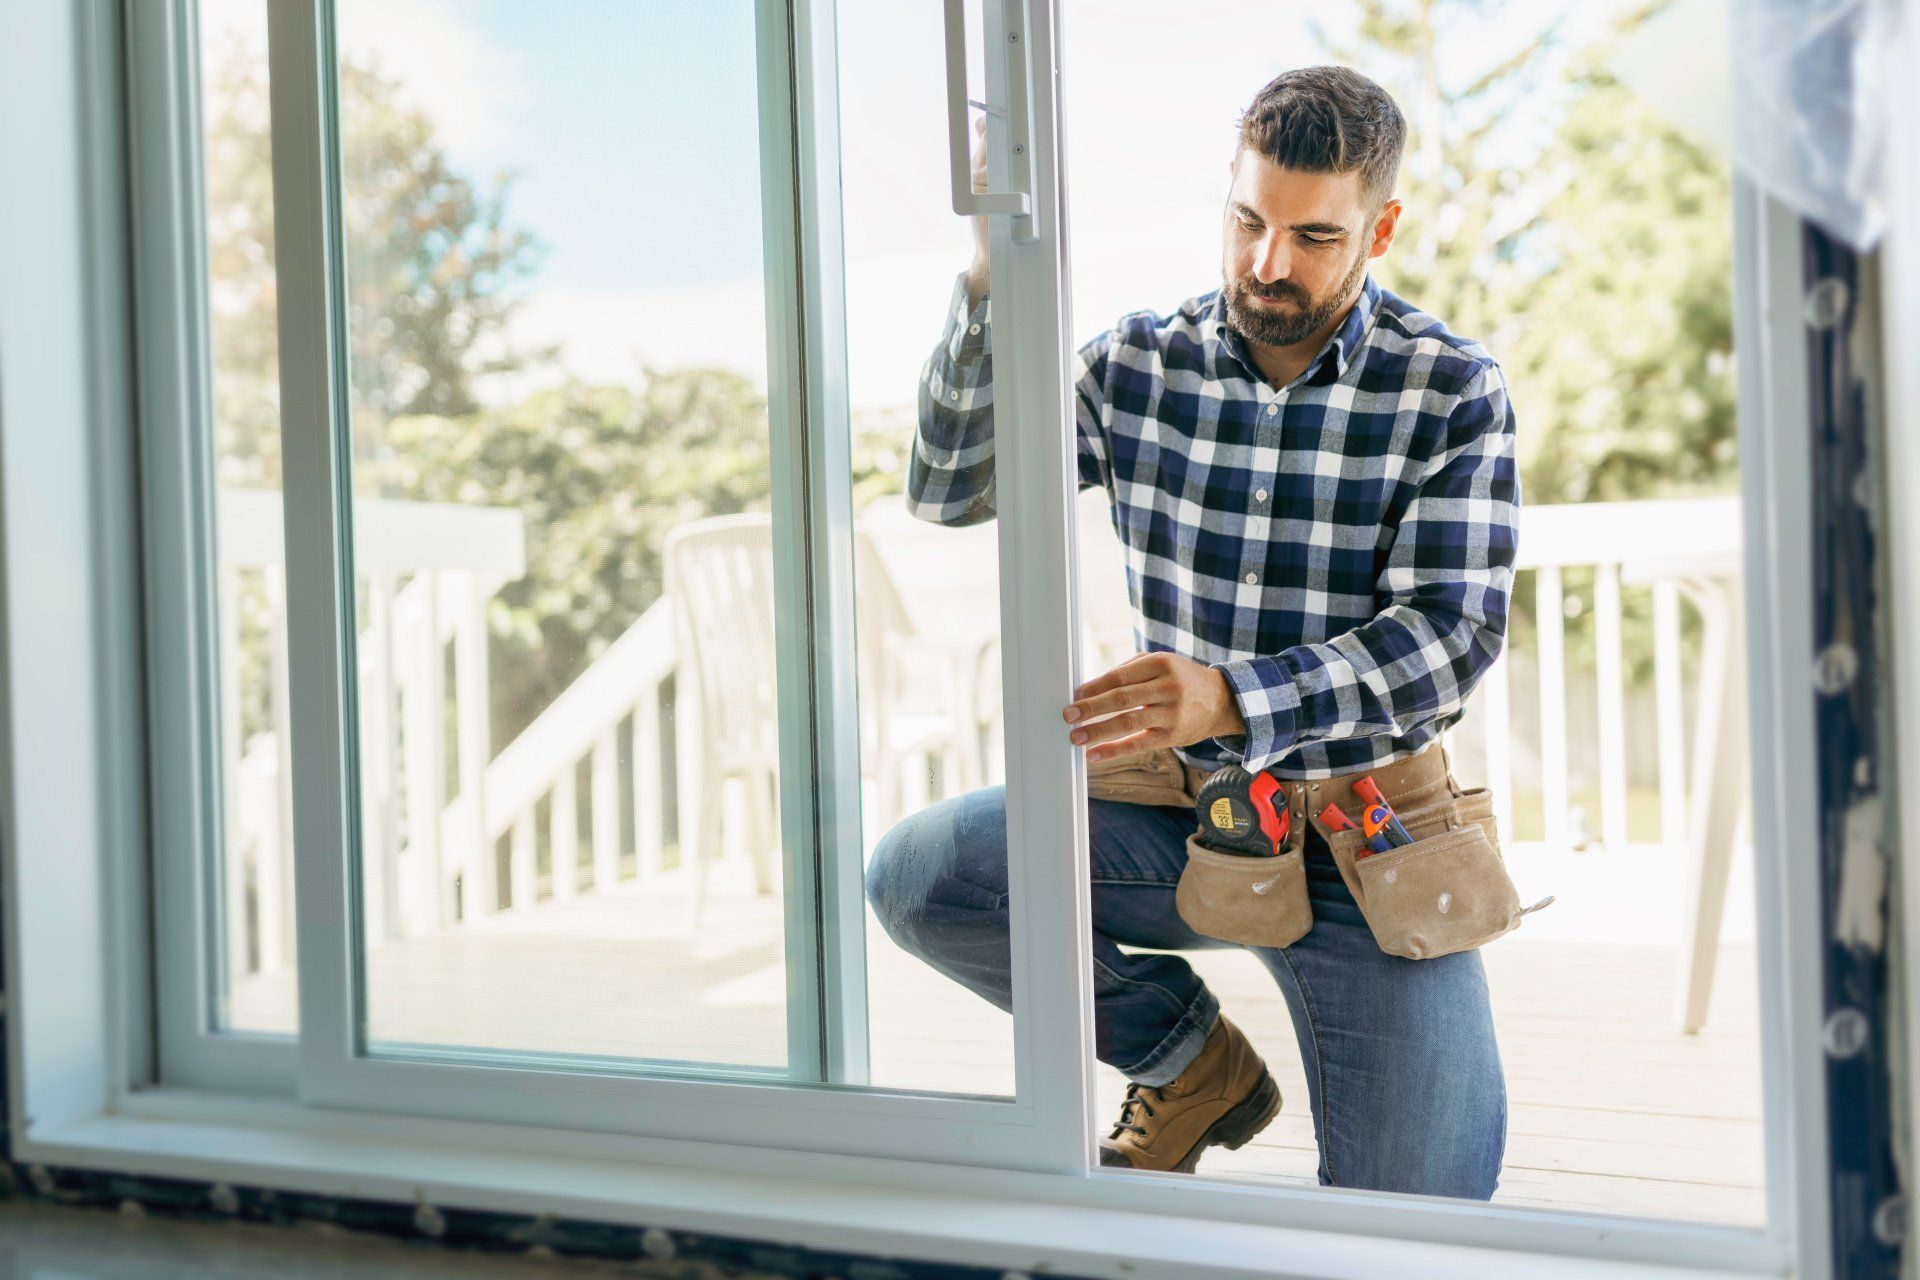 replacement window installers near me